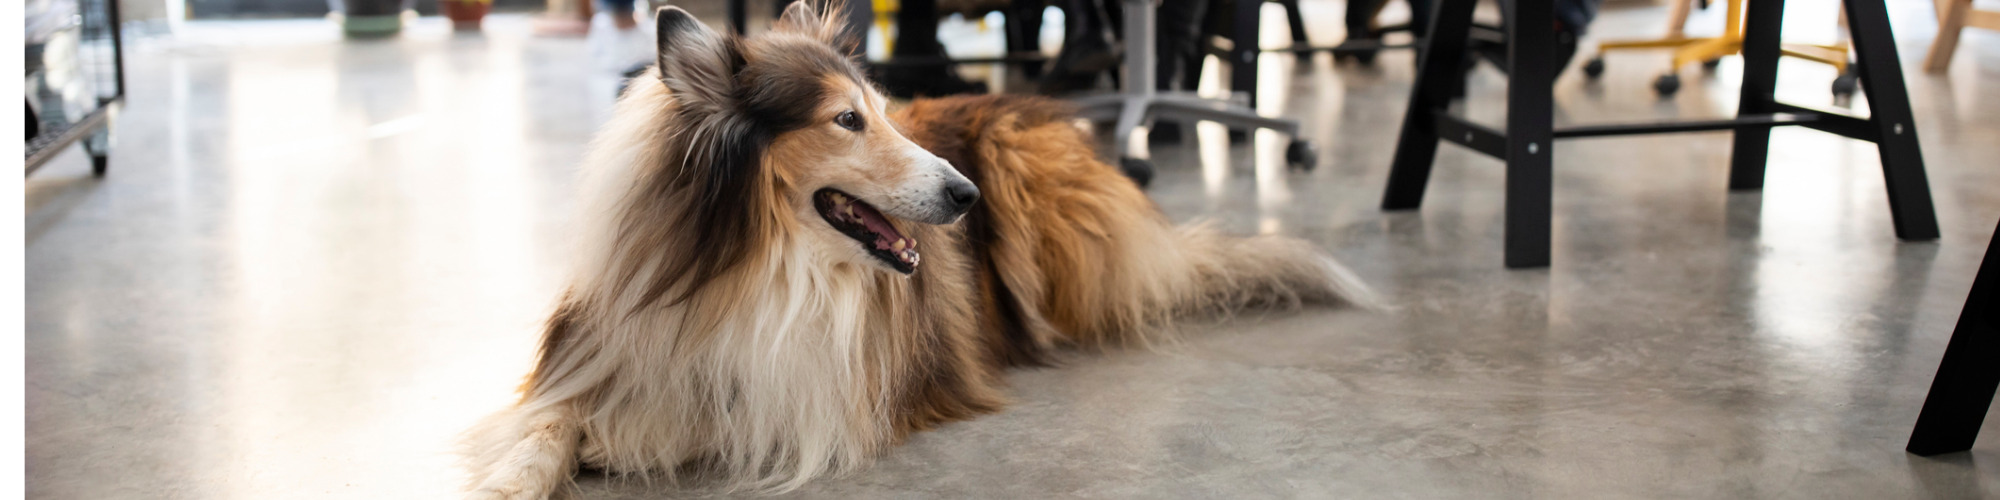 Paws for Thought - Dog-Friendly Policies & the Workplace